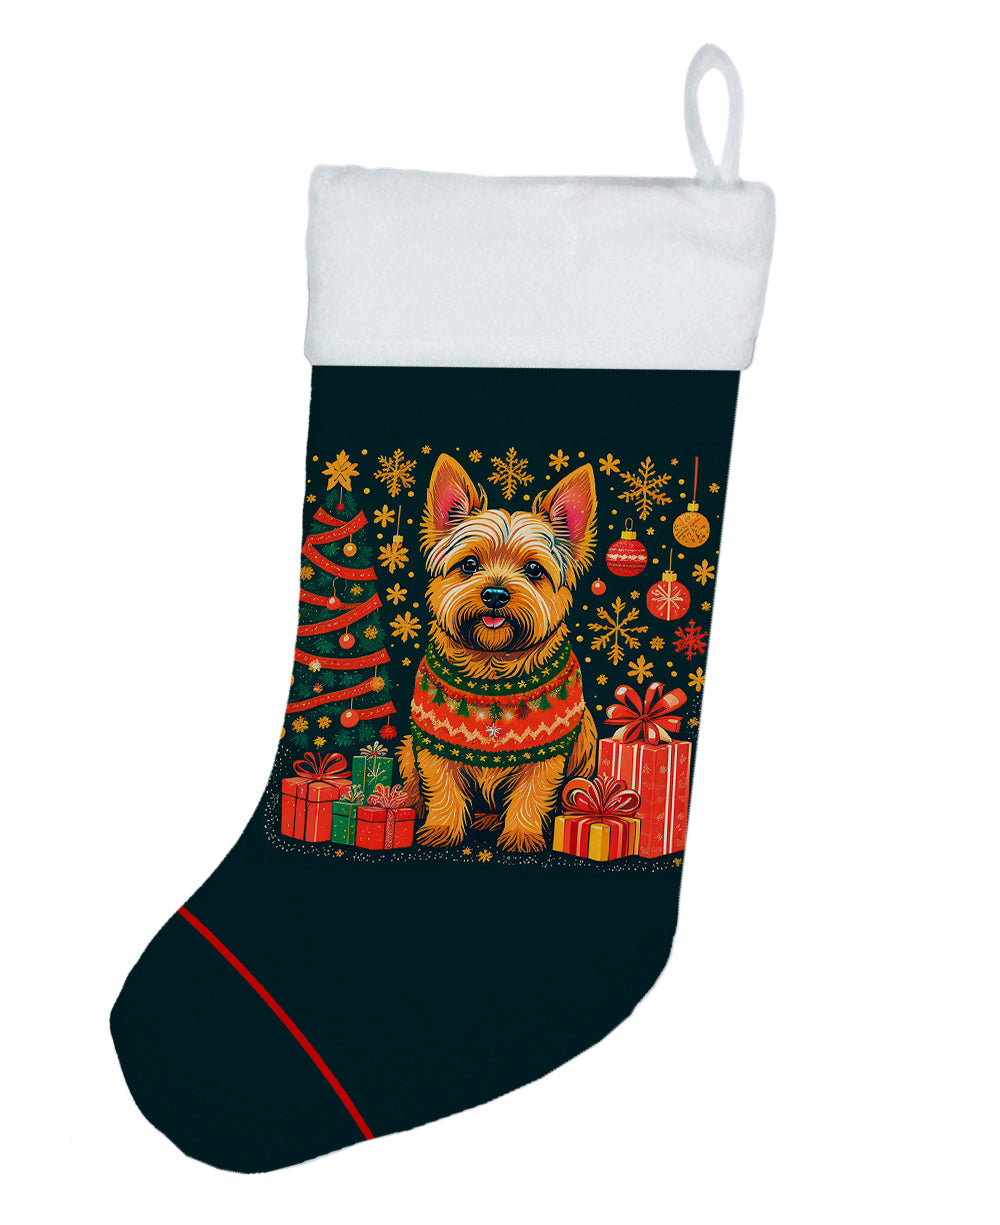 Buy this Norwich Terrier Christmas Christmas Stocking